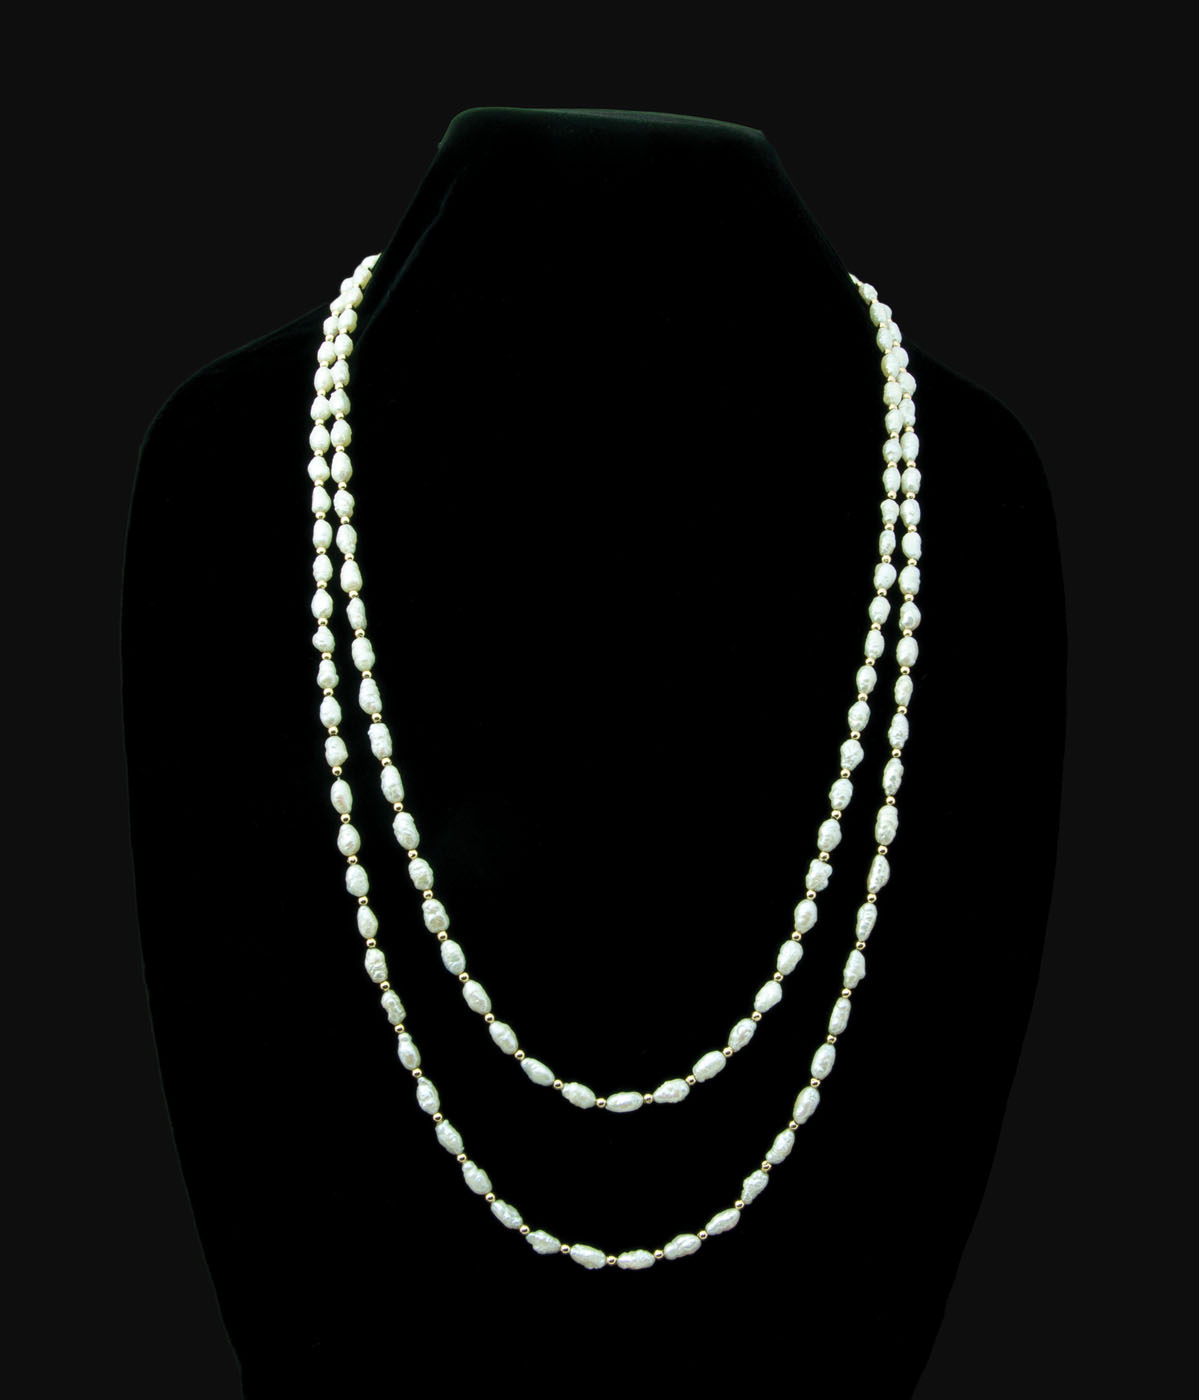 Lot 28: Pearl Necklace – Willis Henry Auctions, Inc.